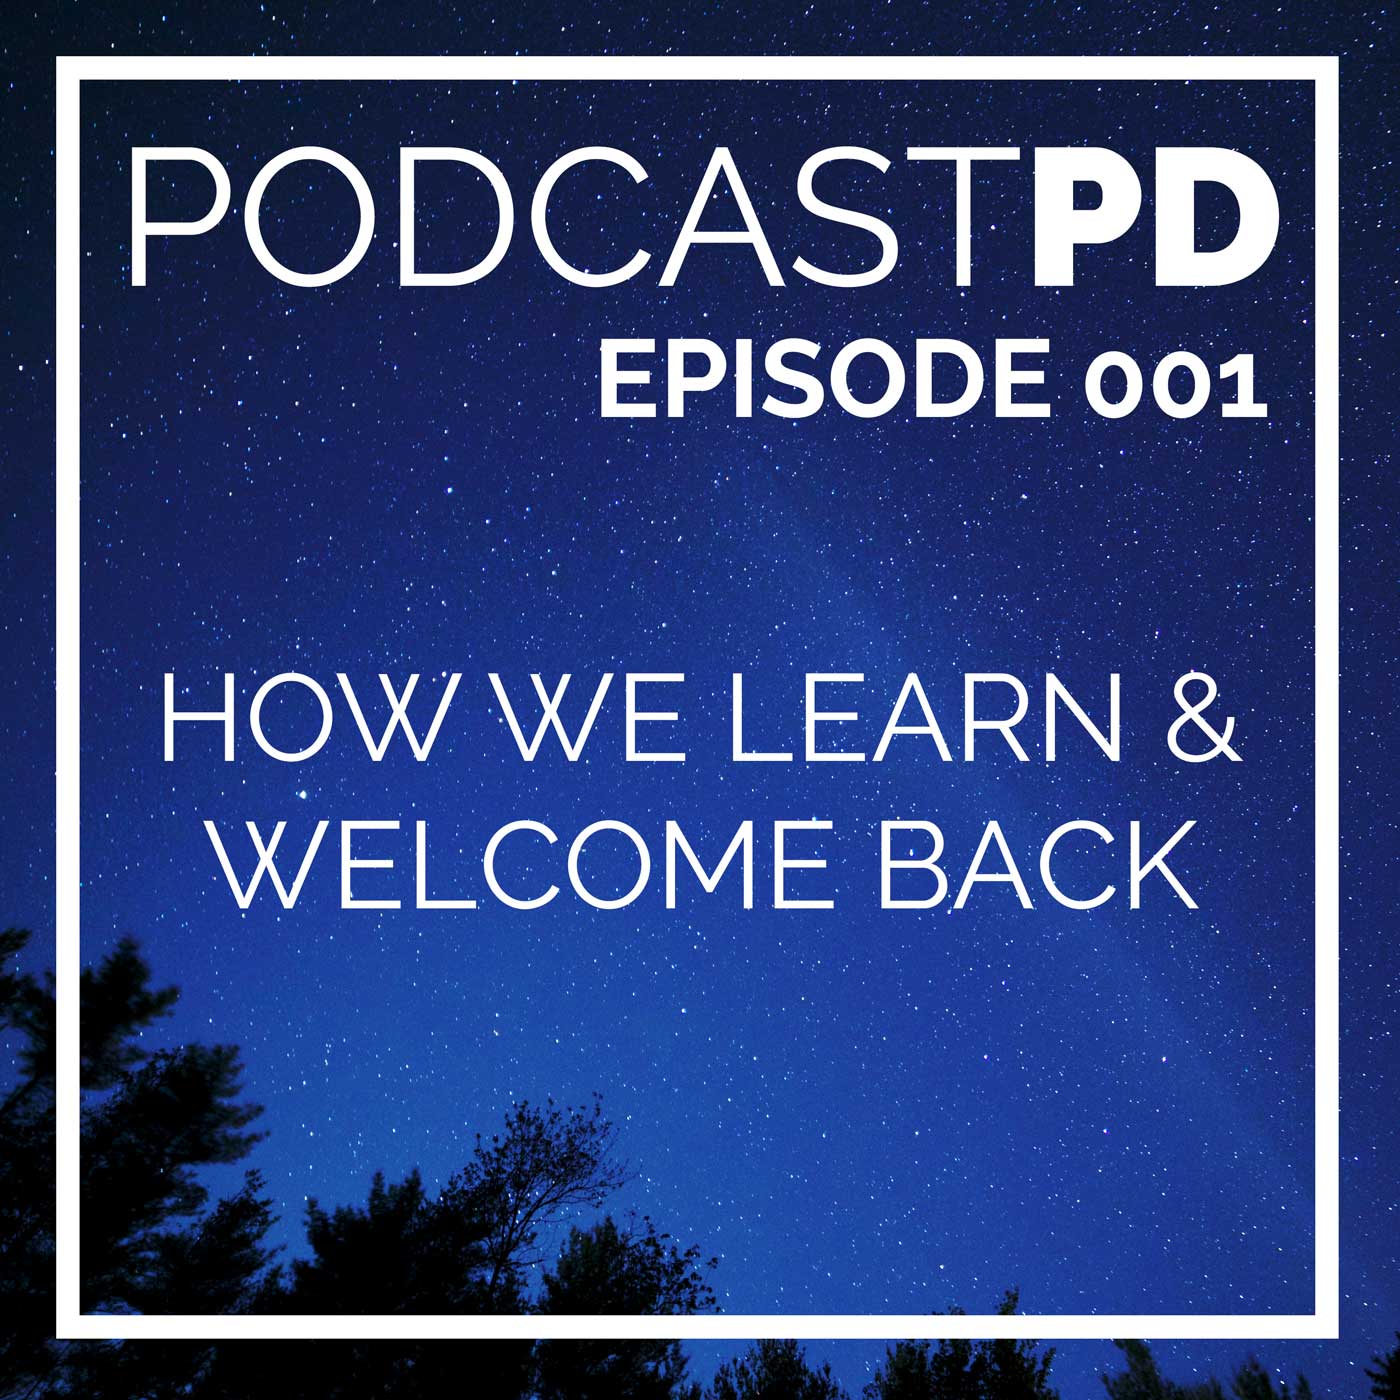 How We Learn & Welcome Back! - PPD001 Image